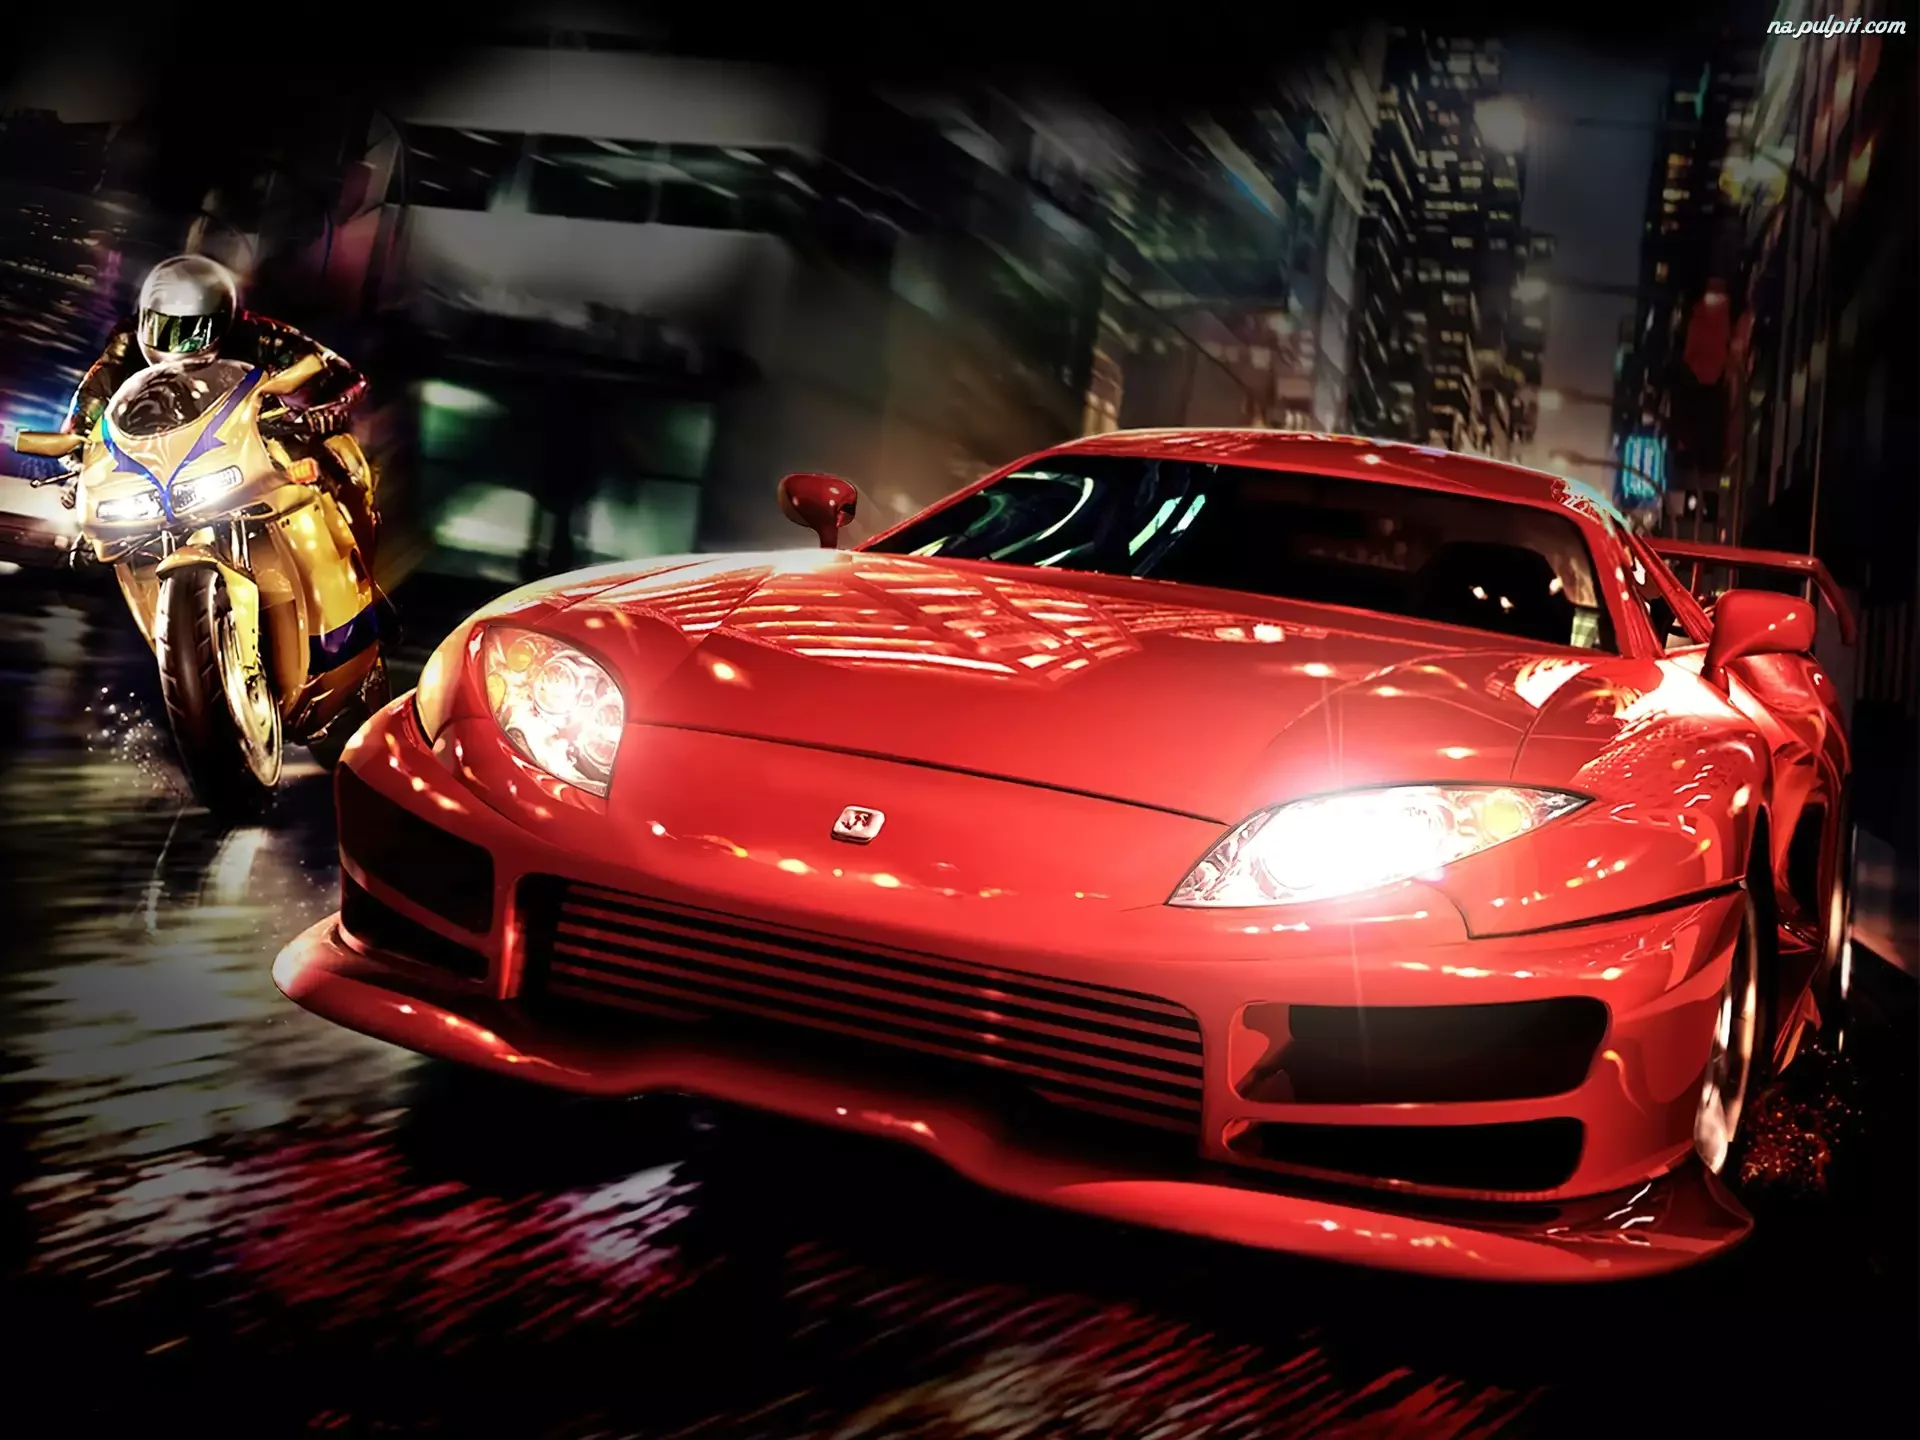 Arcade racing game Midnight Club 2 gets improved graphics thanks to NVIDIA RTX Remix